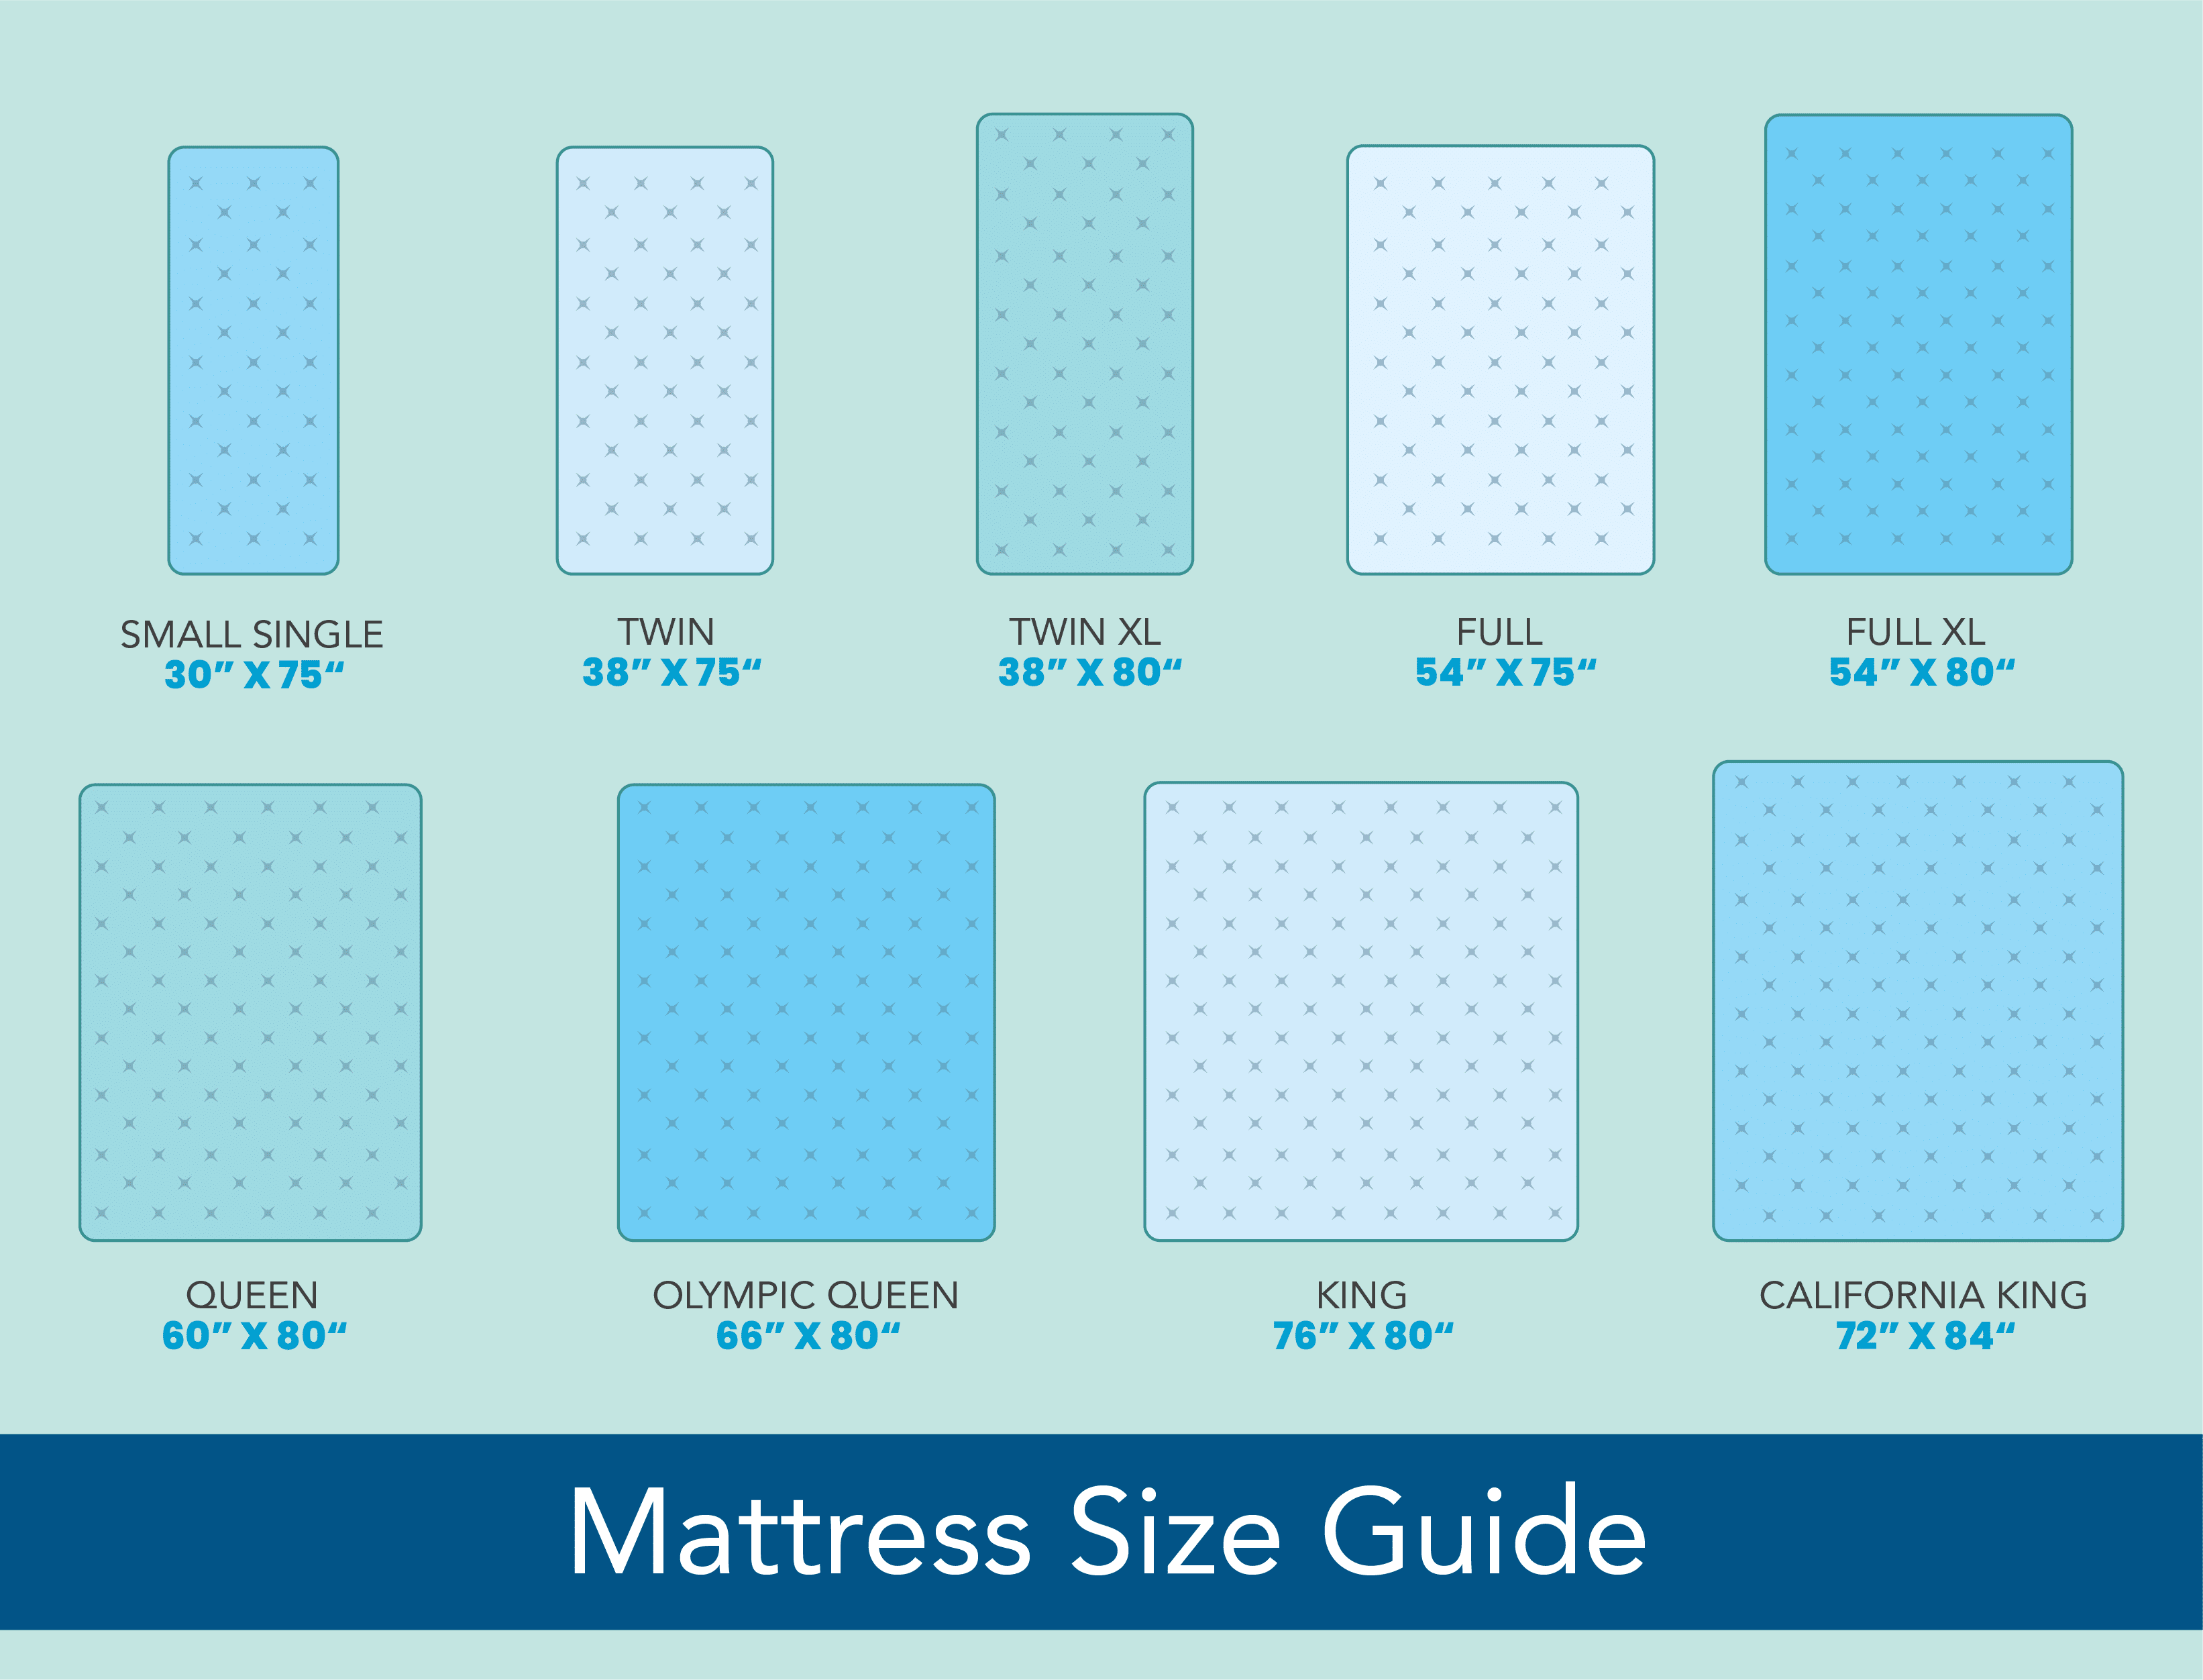 Mattress Sizes: Finding the Best Mattress Size for Your Room